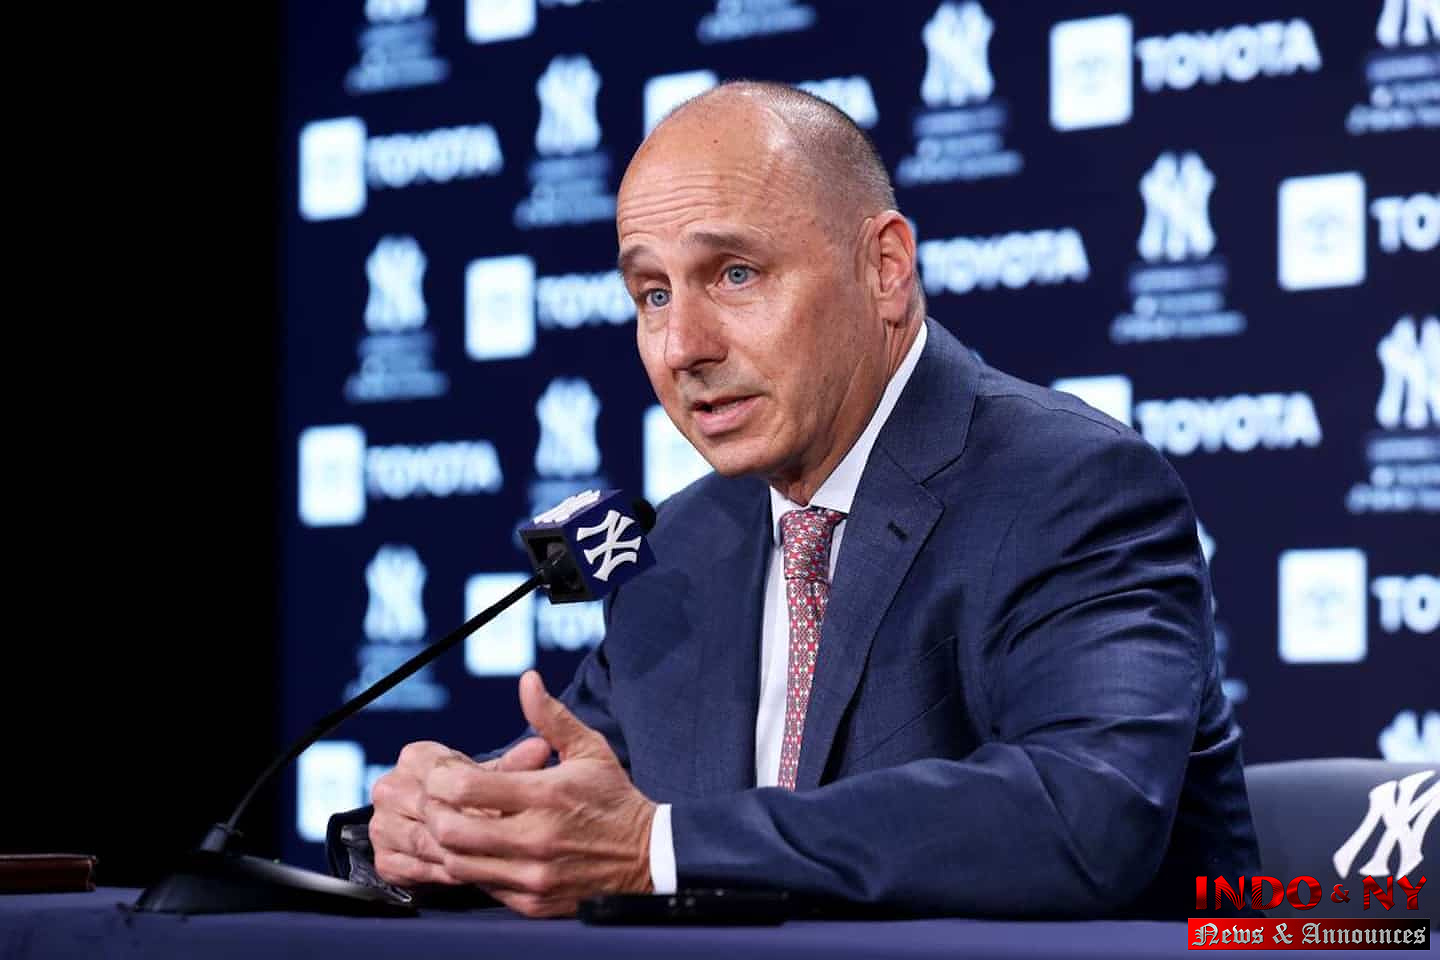 Yankees GM Brian Cashman tired of being asked about negotiations with Aaron Judge